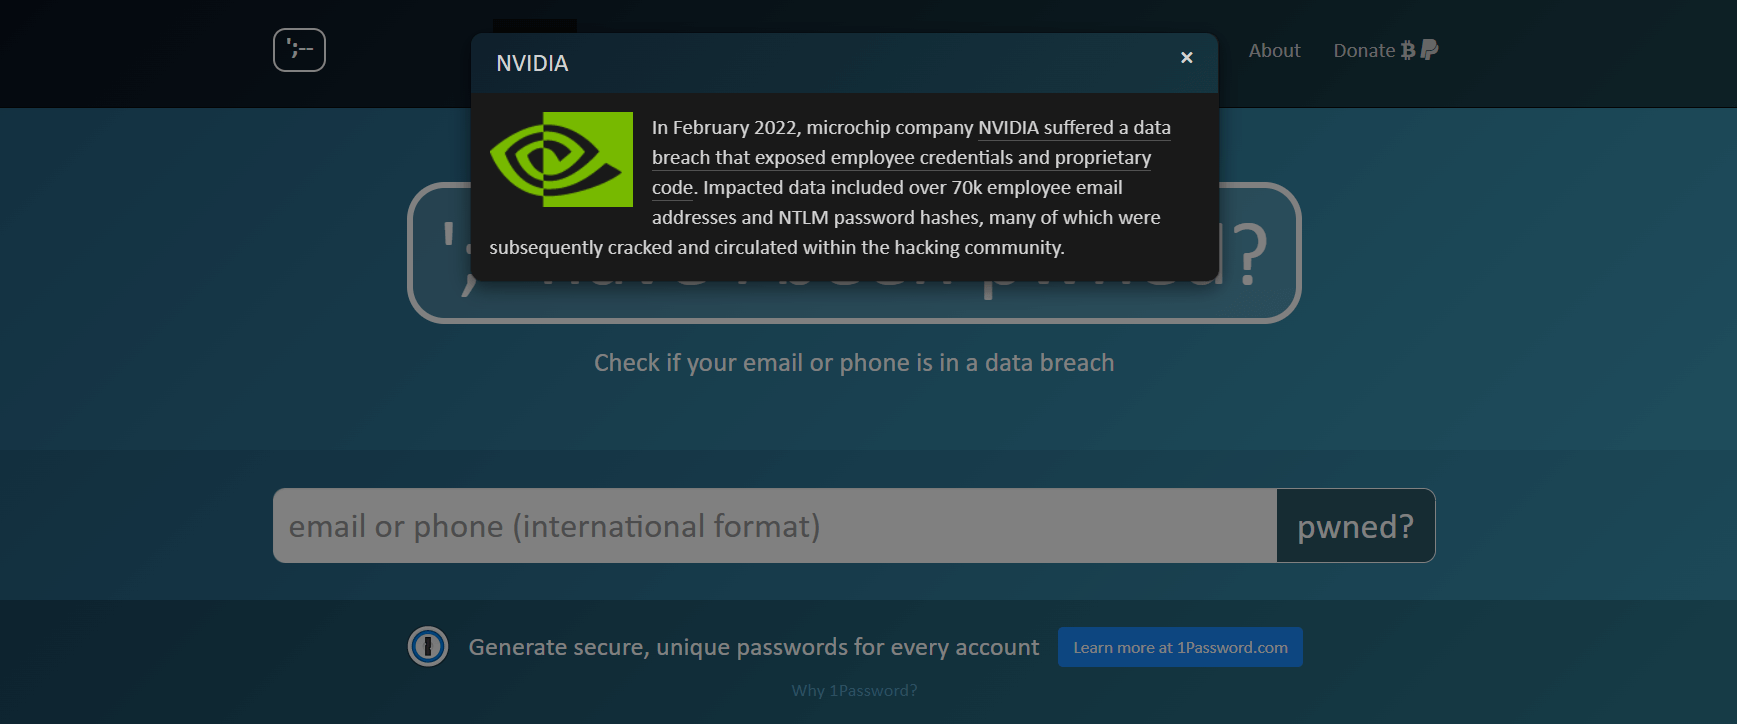 have I been pwned Nvidia data breach